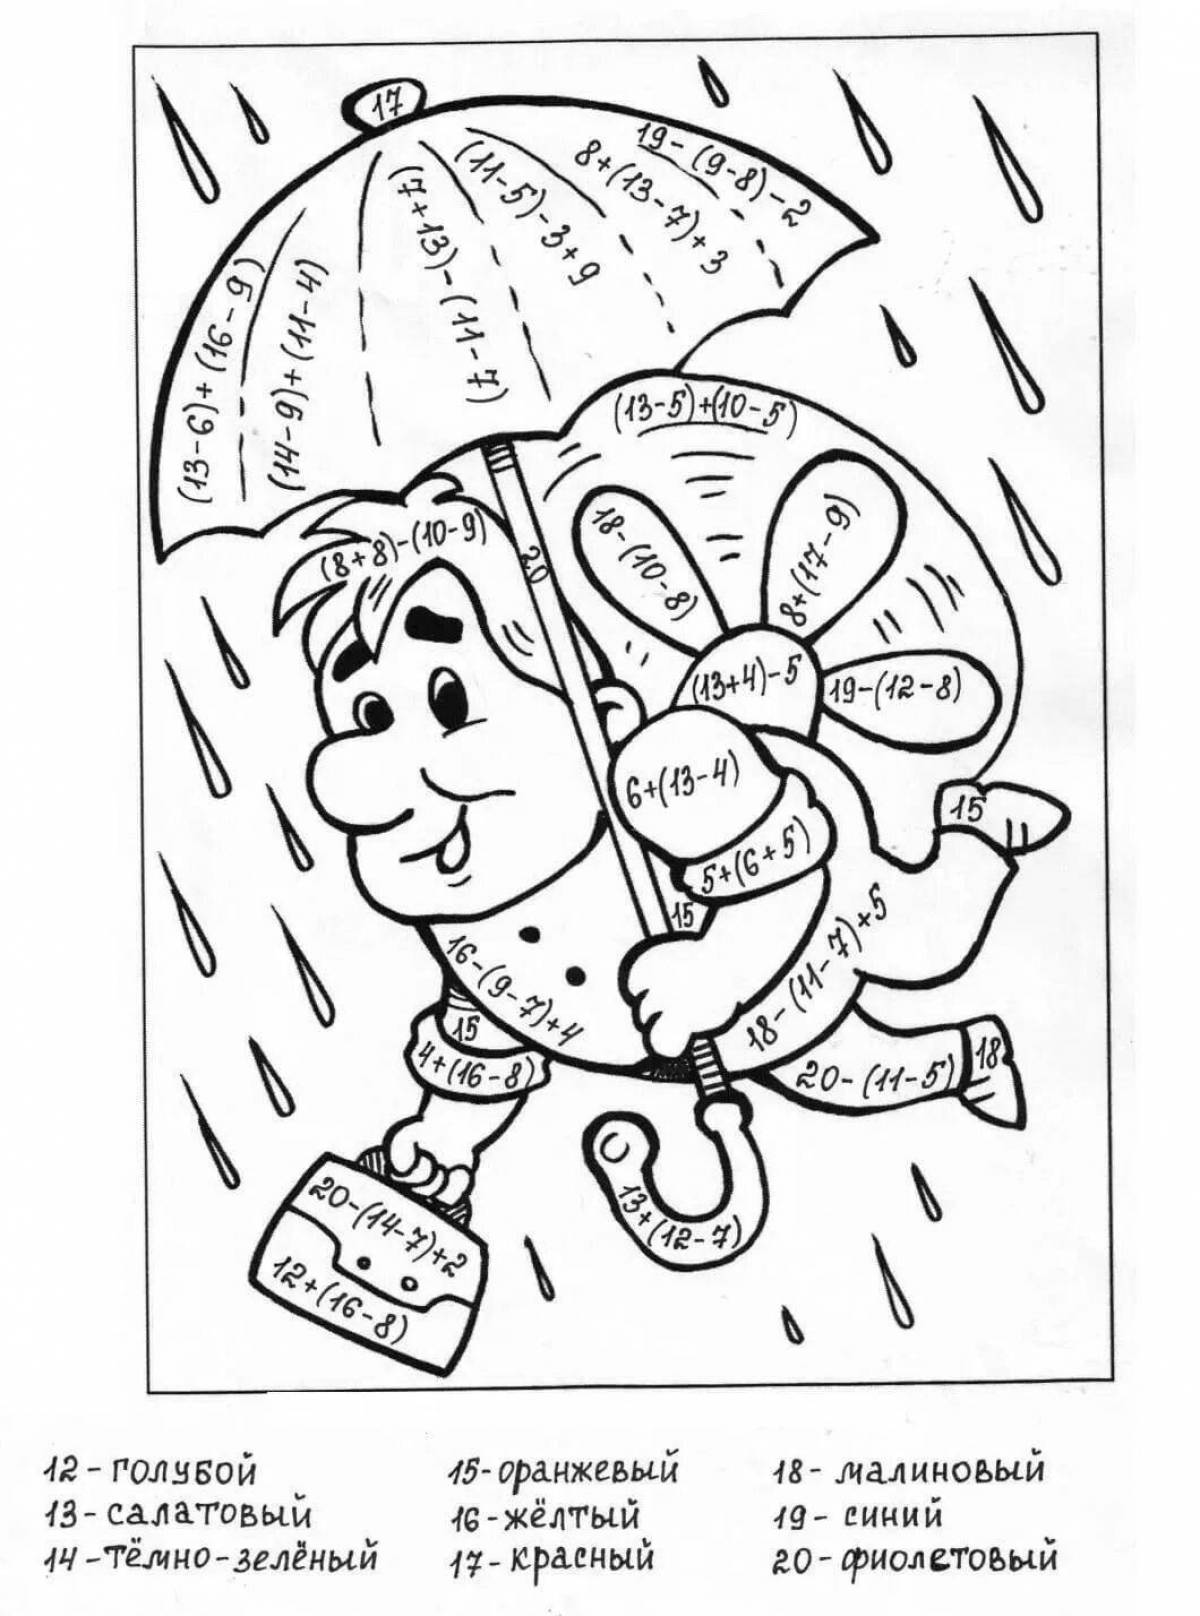 Examples of coloring pages for 2nd grade math